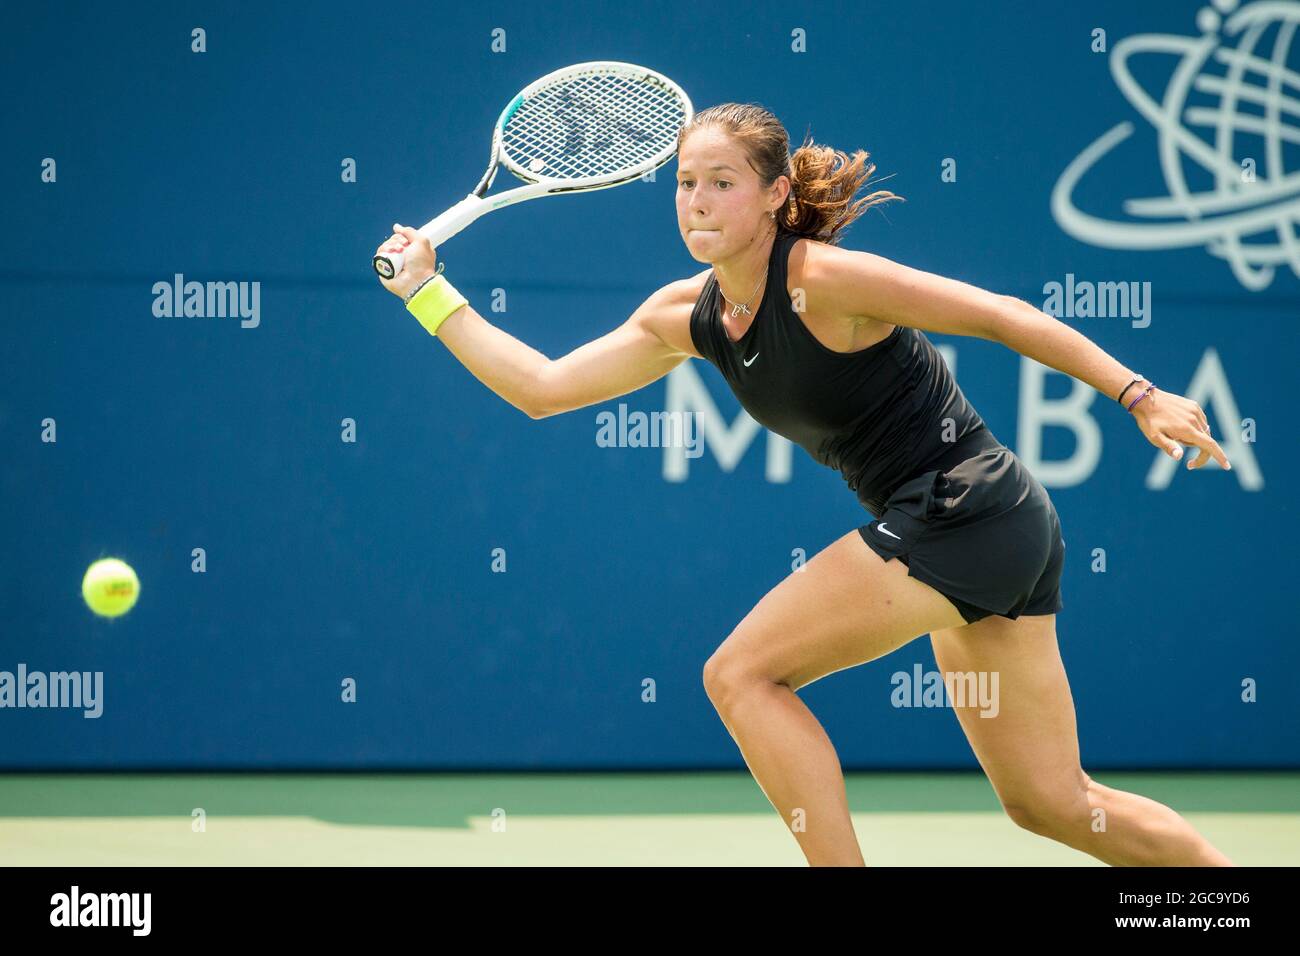 August 06, 2021: Daria Kasatkina (RUS) defeated Magda Linette (POL) 64 36 64 in the quarterfinals of the Mubadala Silicon Valley Classic at San Jose State University in San Jose, California. © Mal Taam/TennisClix/CSM Stock Photo